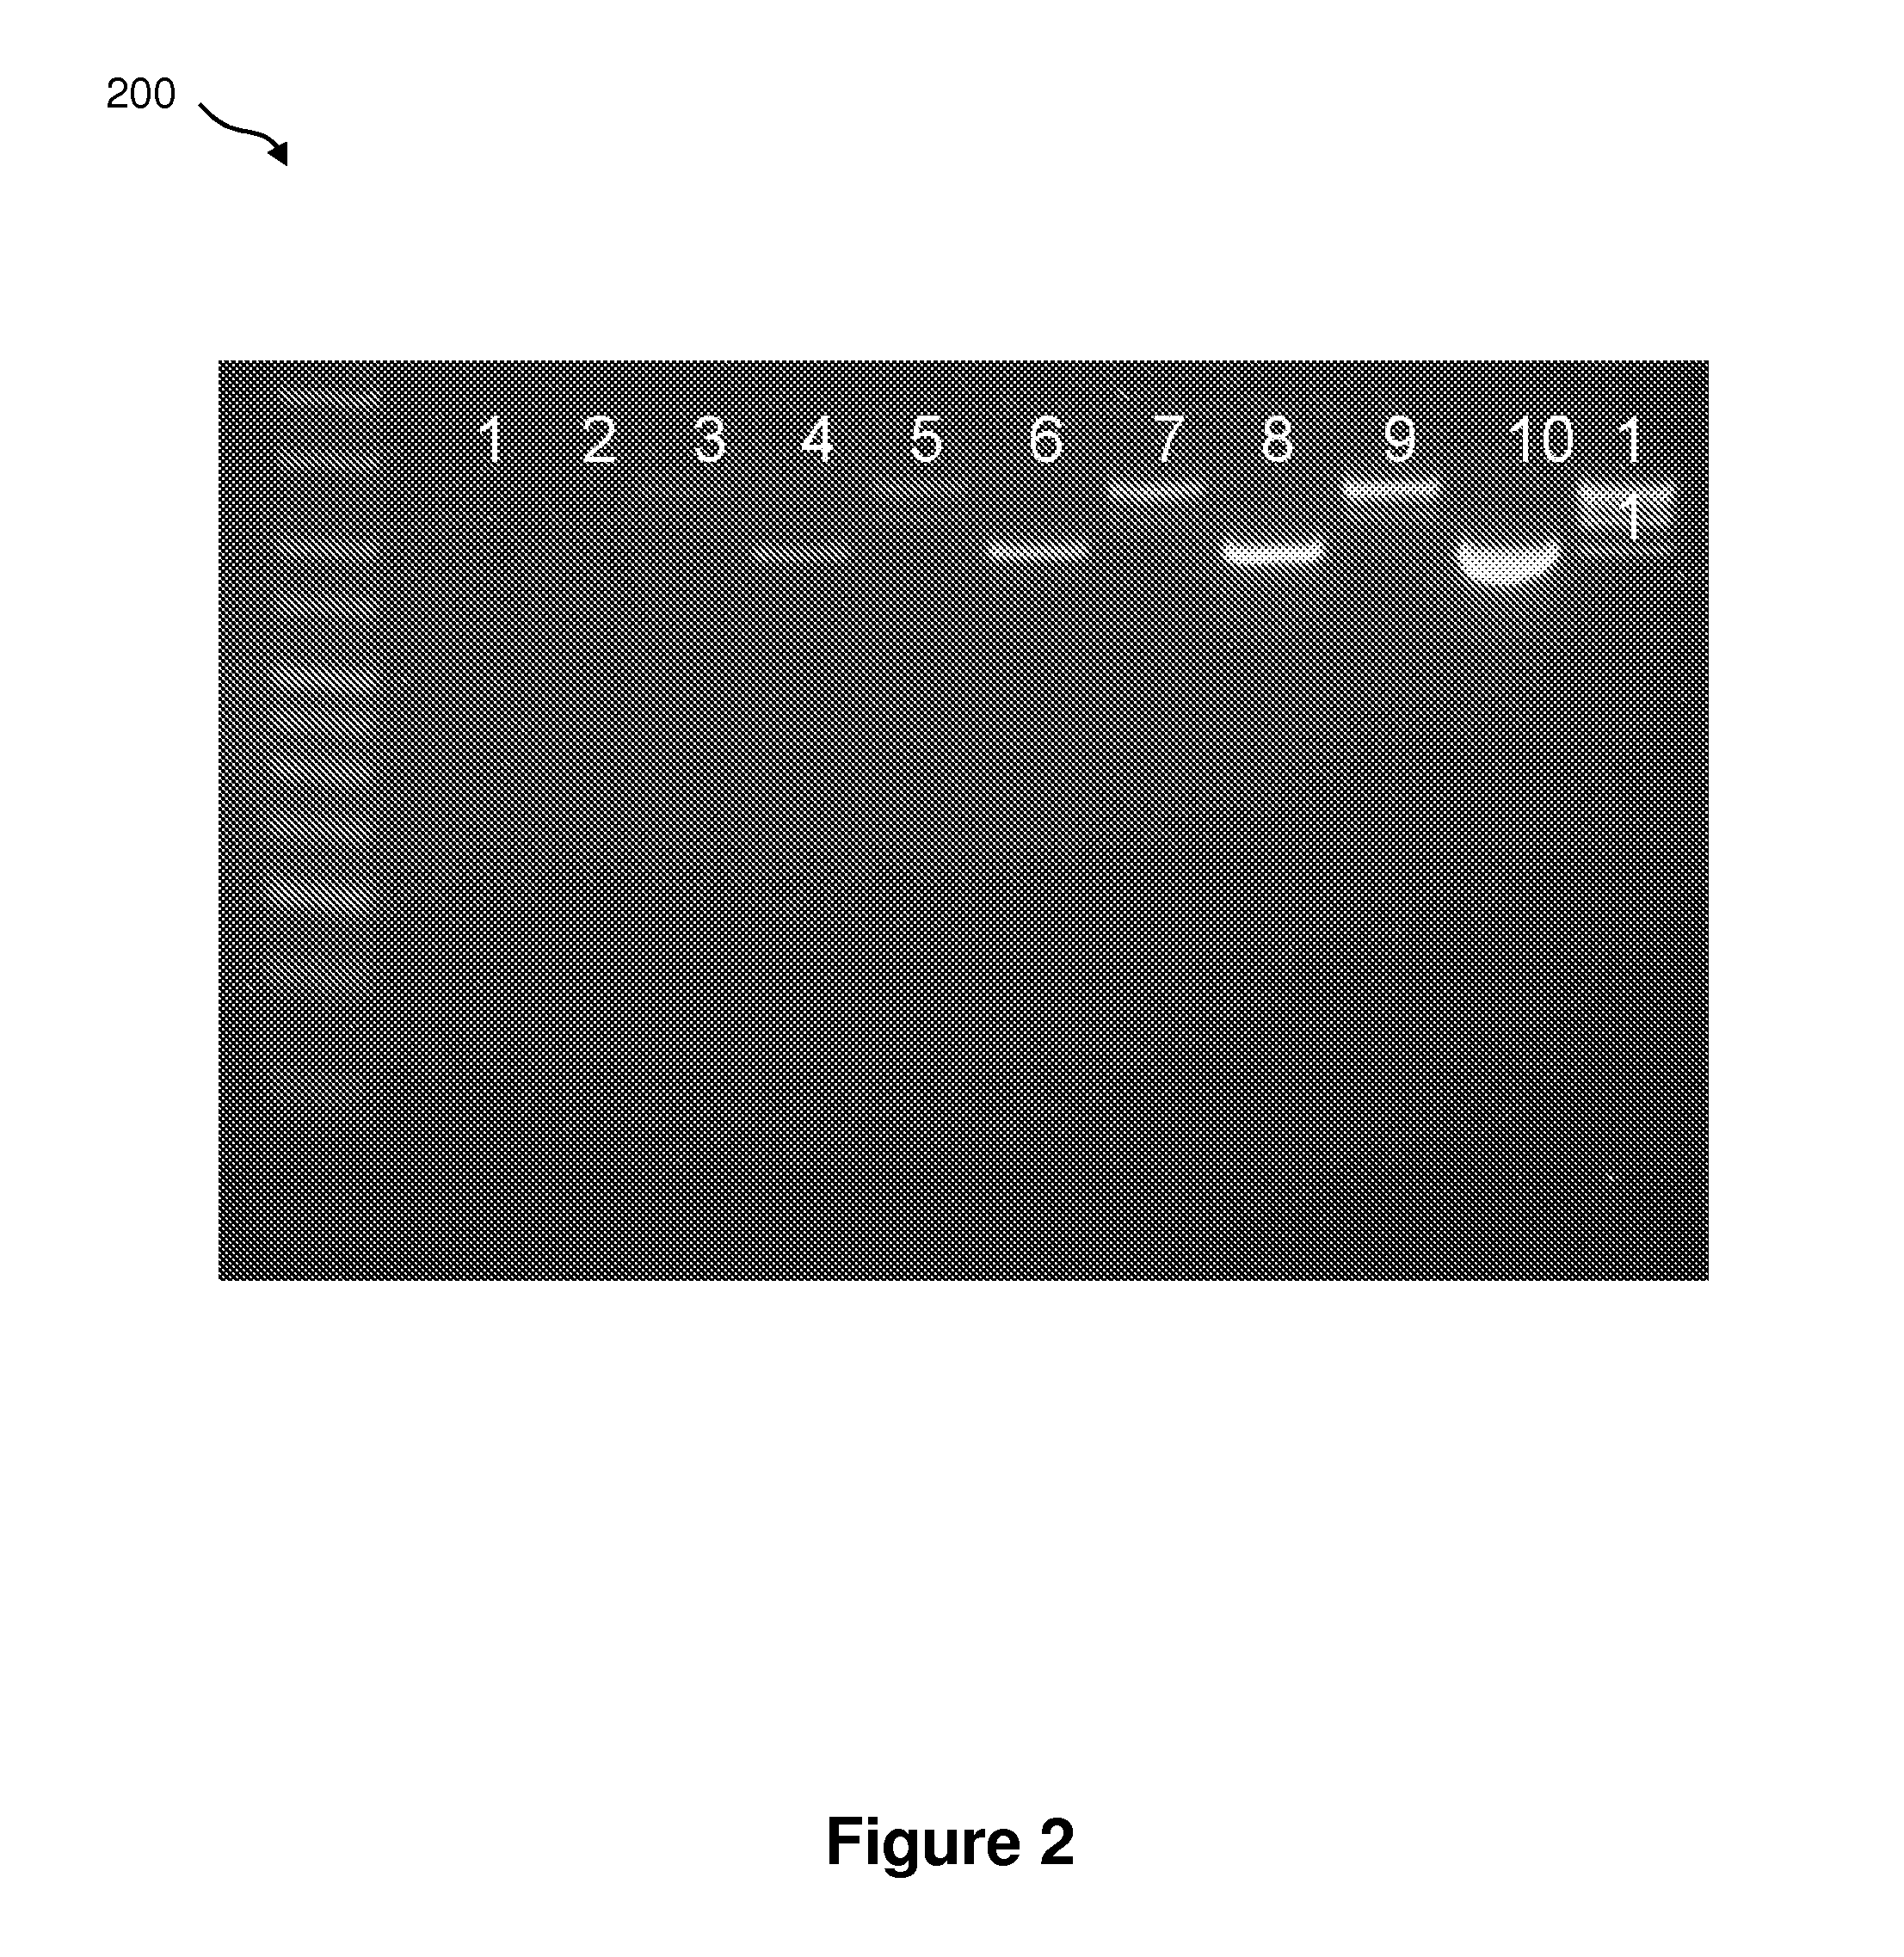 Method of Preparing a Nucleic Acid Library